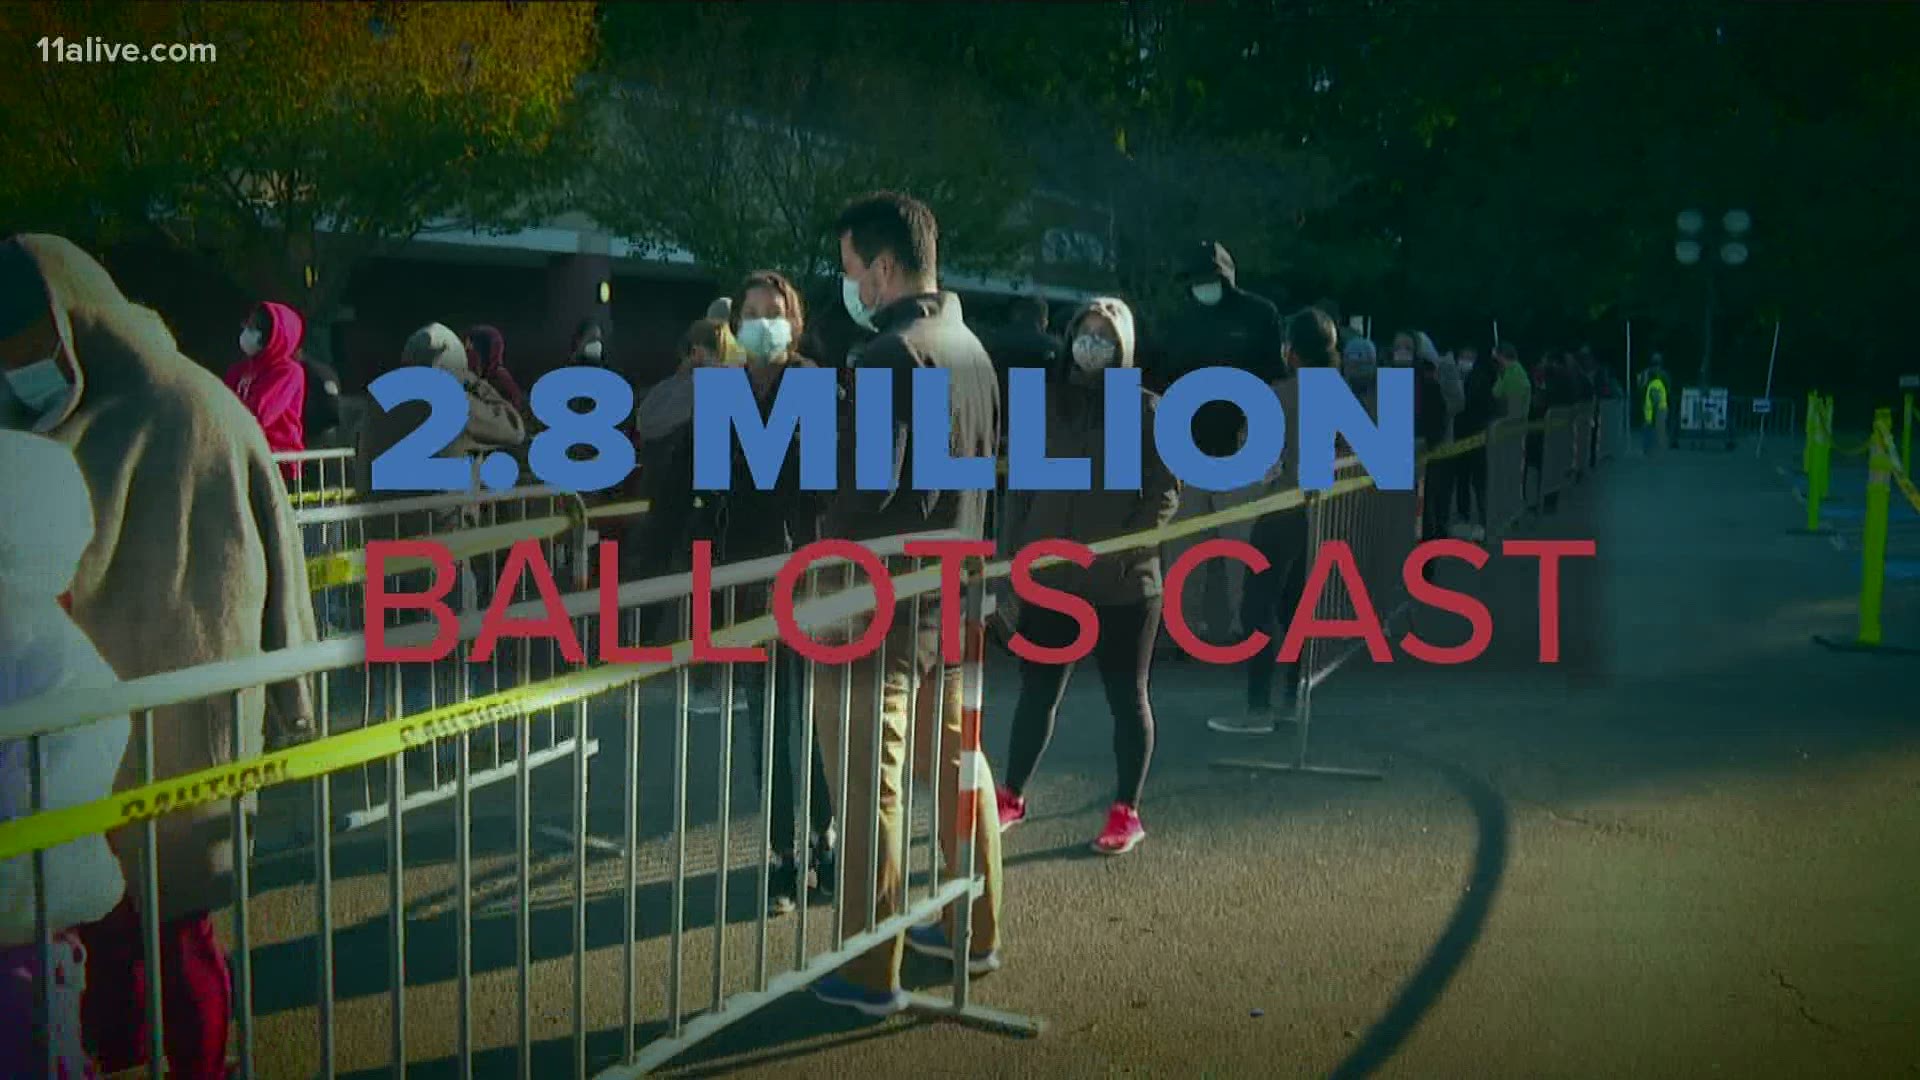 Records across the country include 2.8 million ballots cast in Georgia so far.